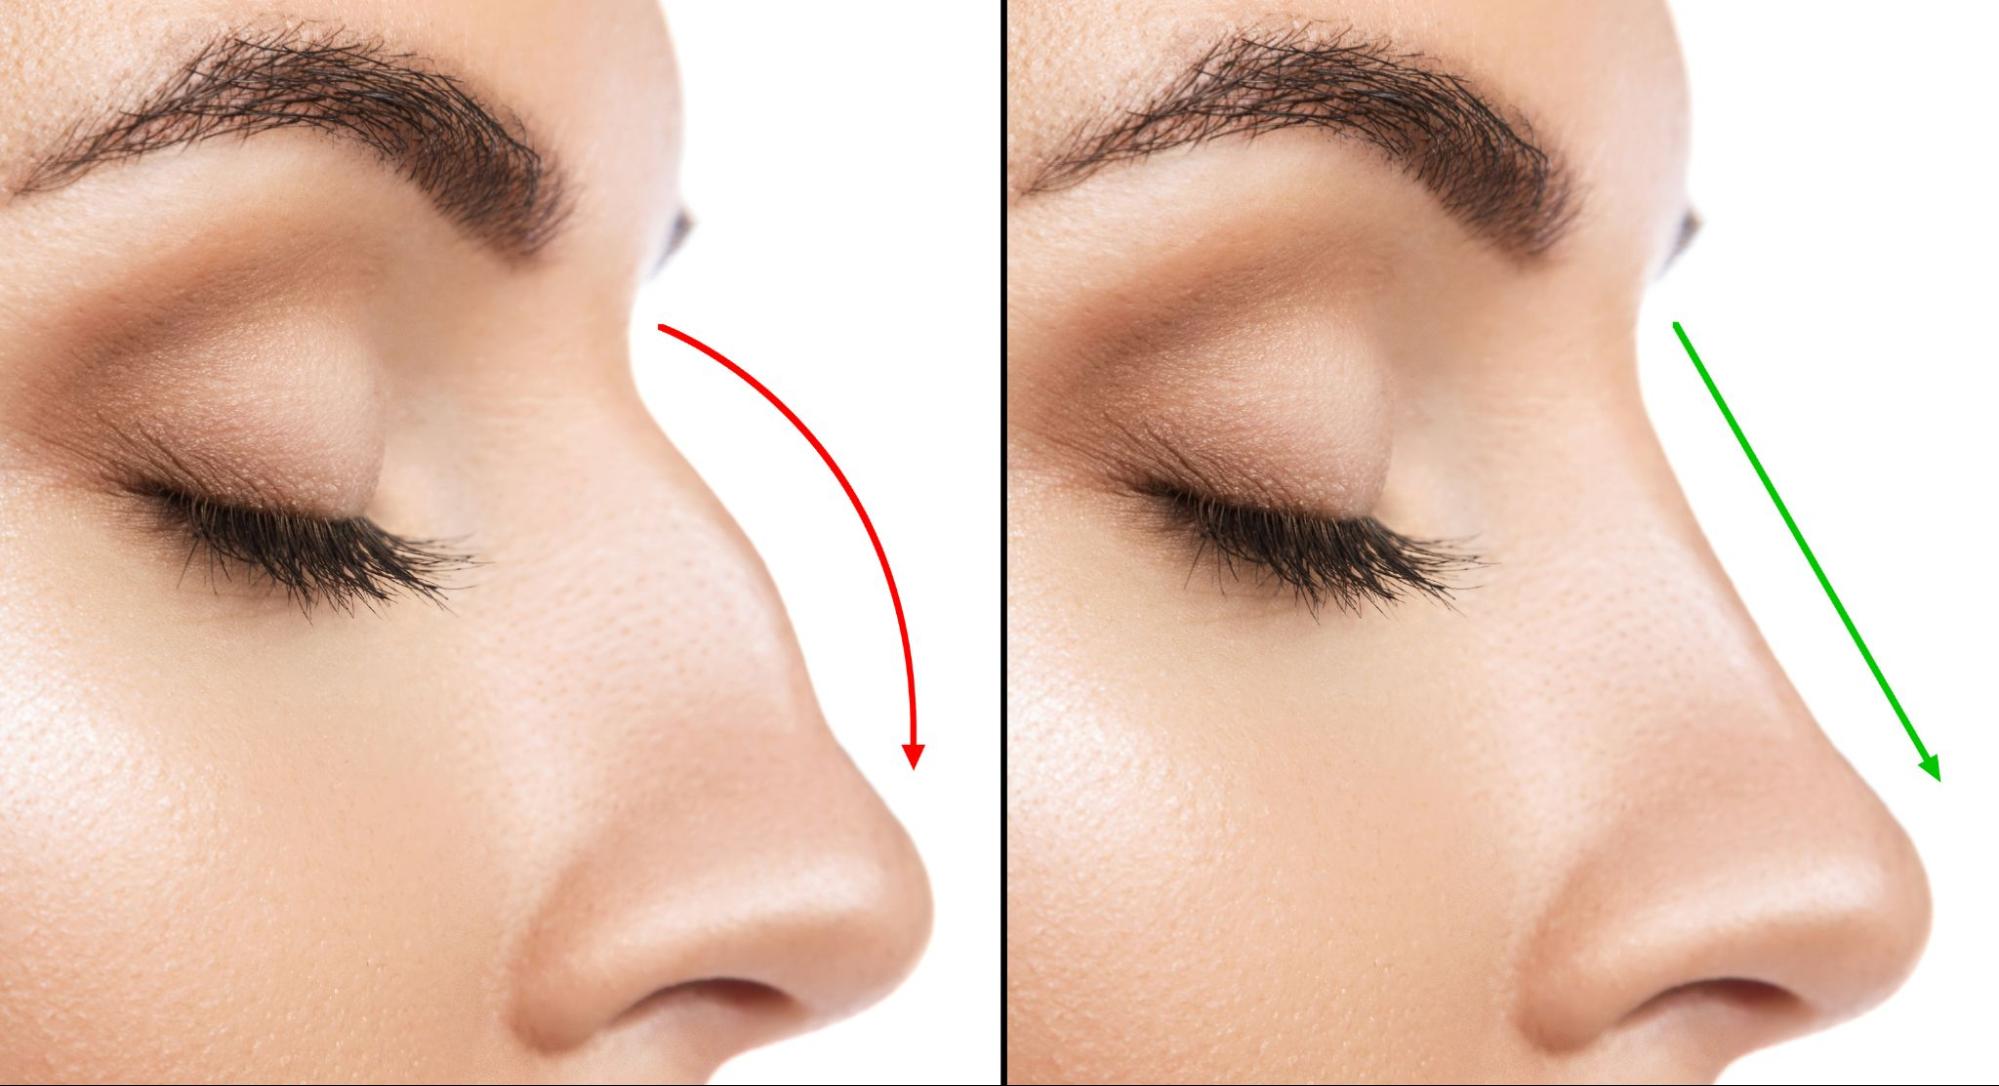 Rhinoplasty: What to Expect Before and After a Nose Job